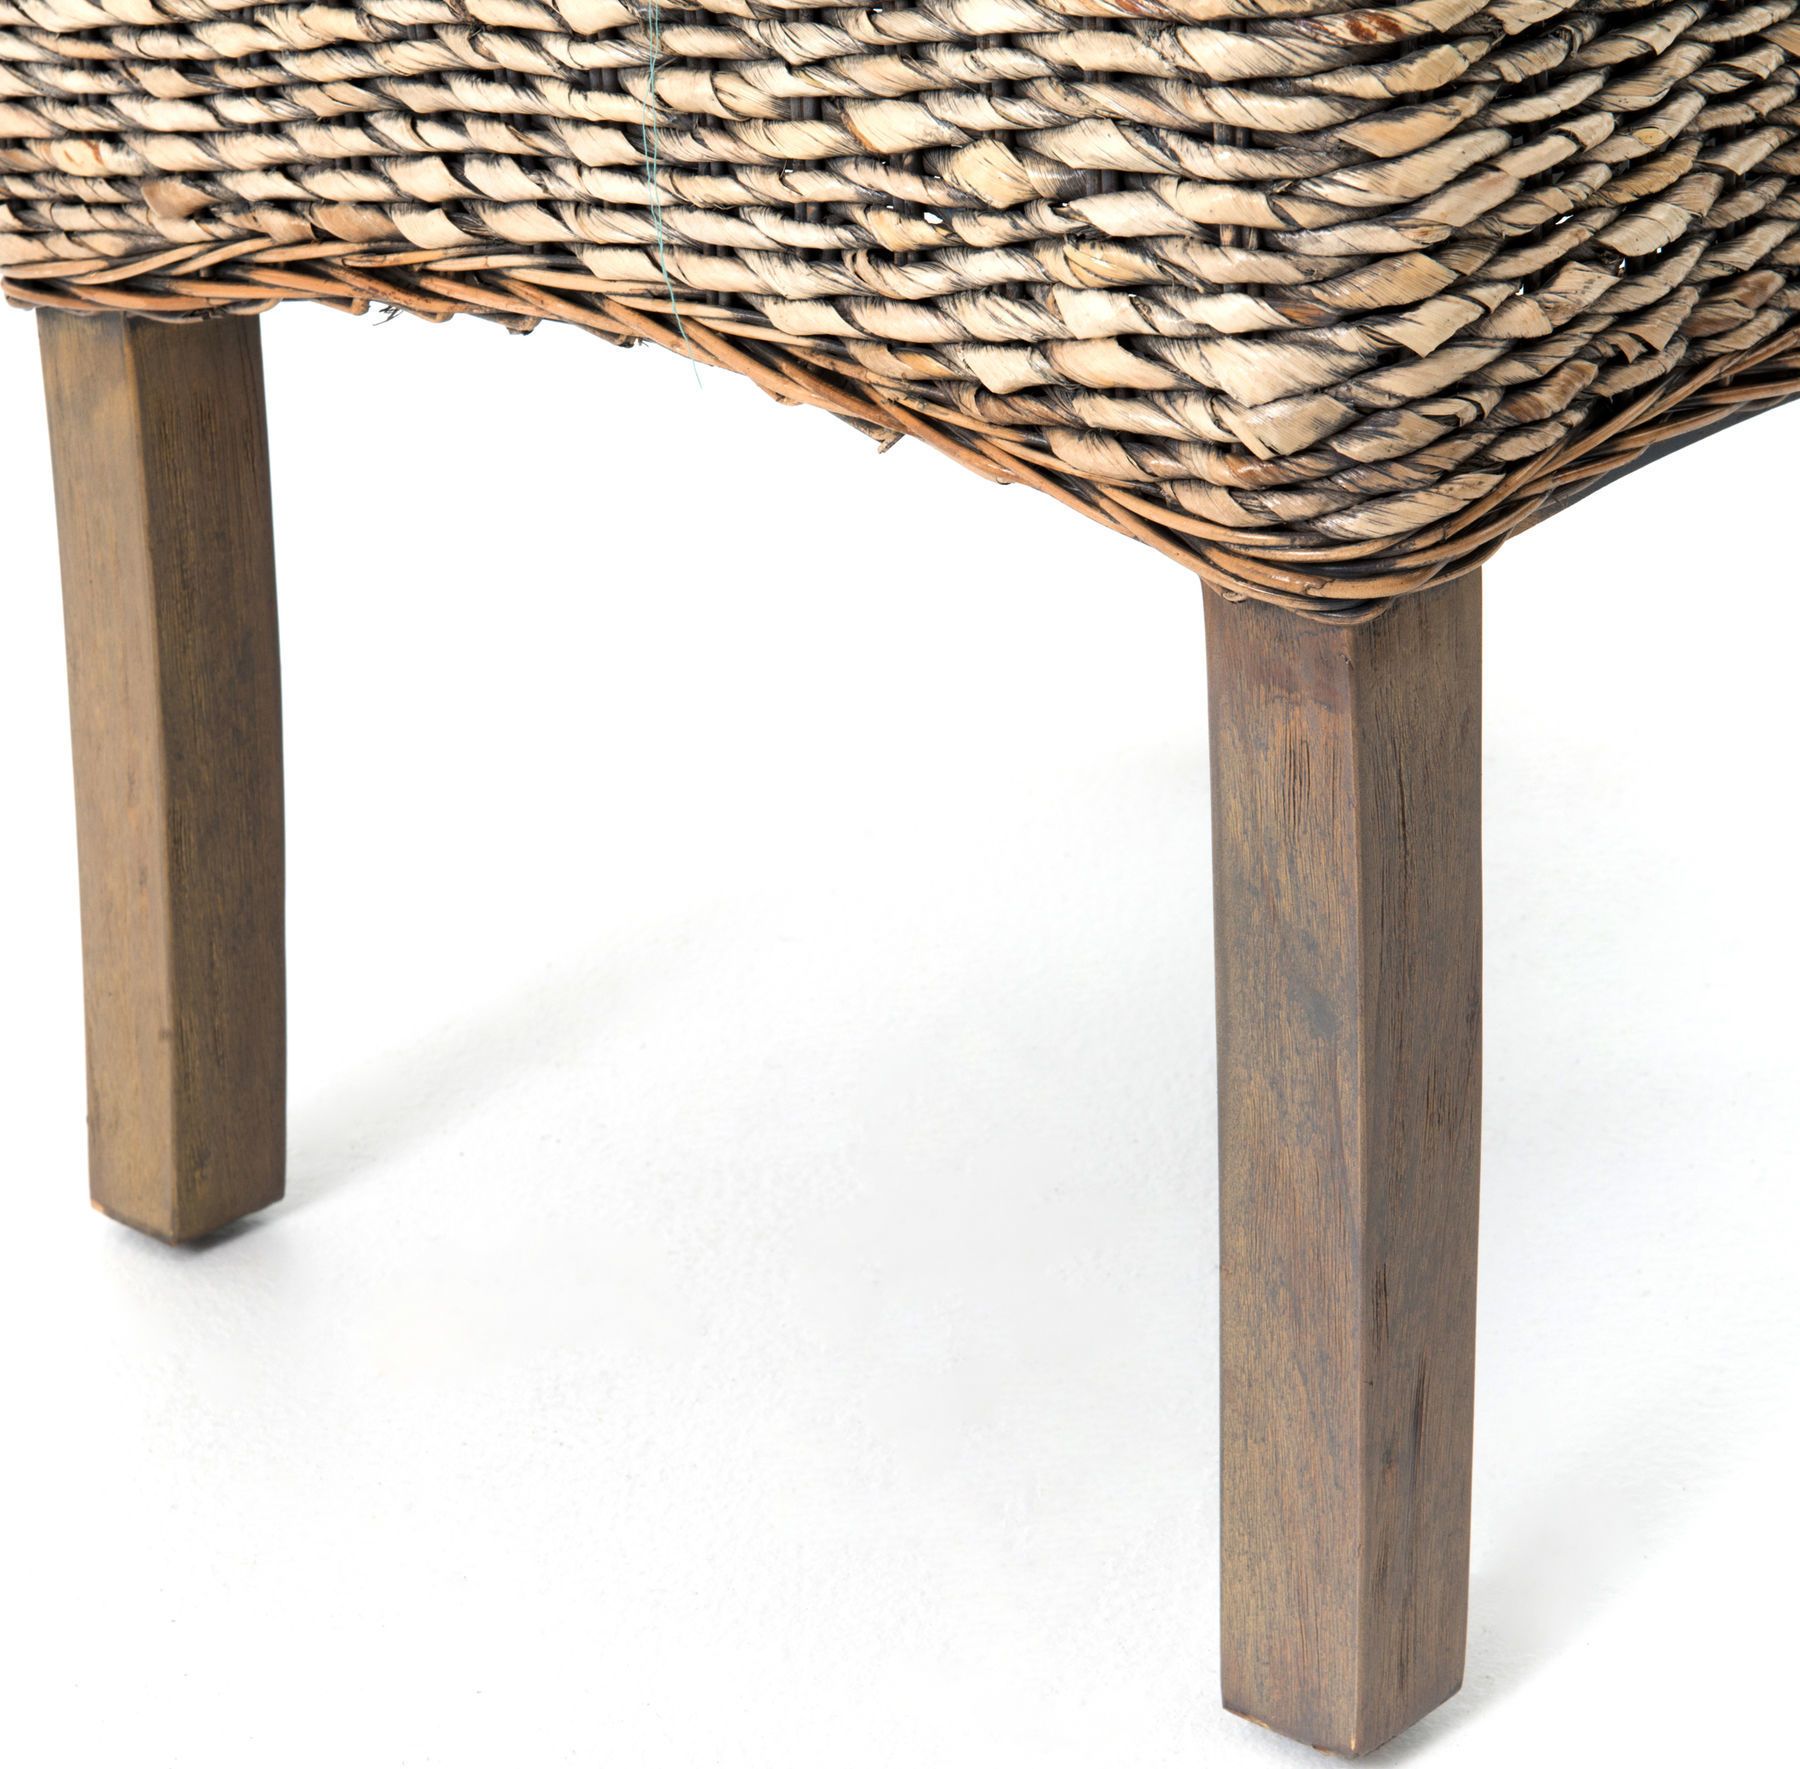 Banana Leaf Chair | Hedgeapple Pertaining To Gray And Natural Banana Leaf Accent Stools (View 18 of 20)